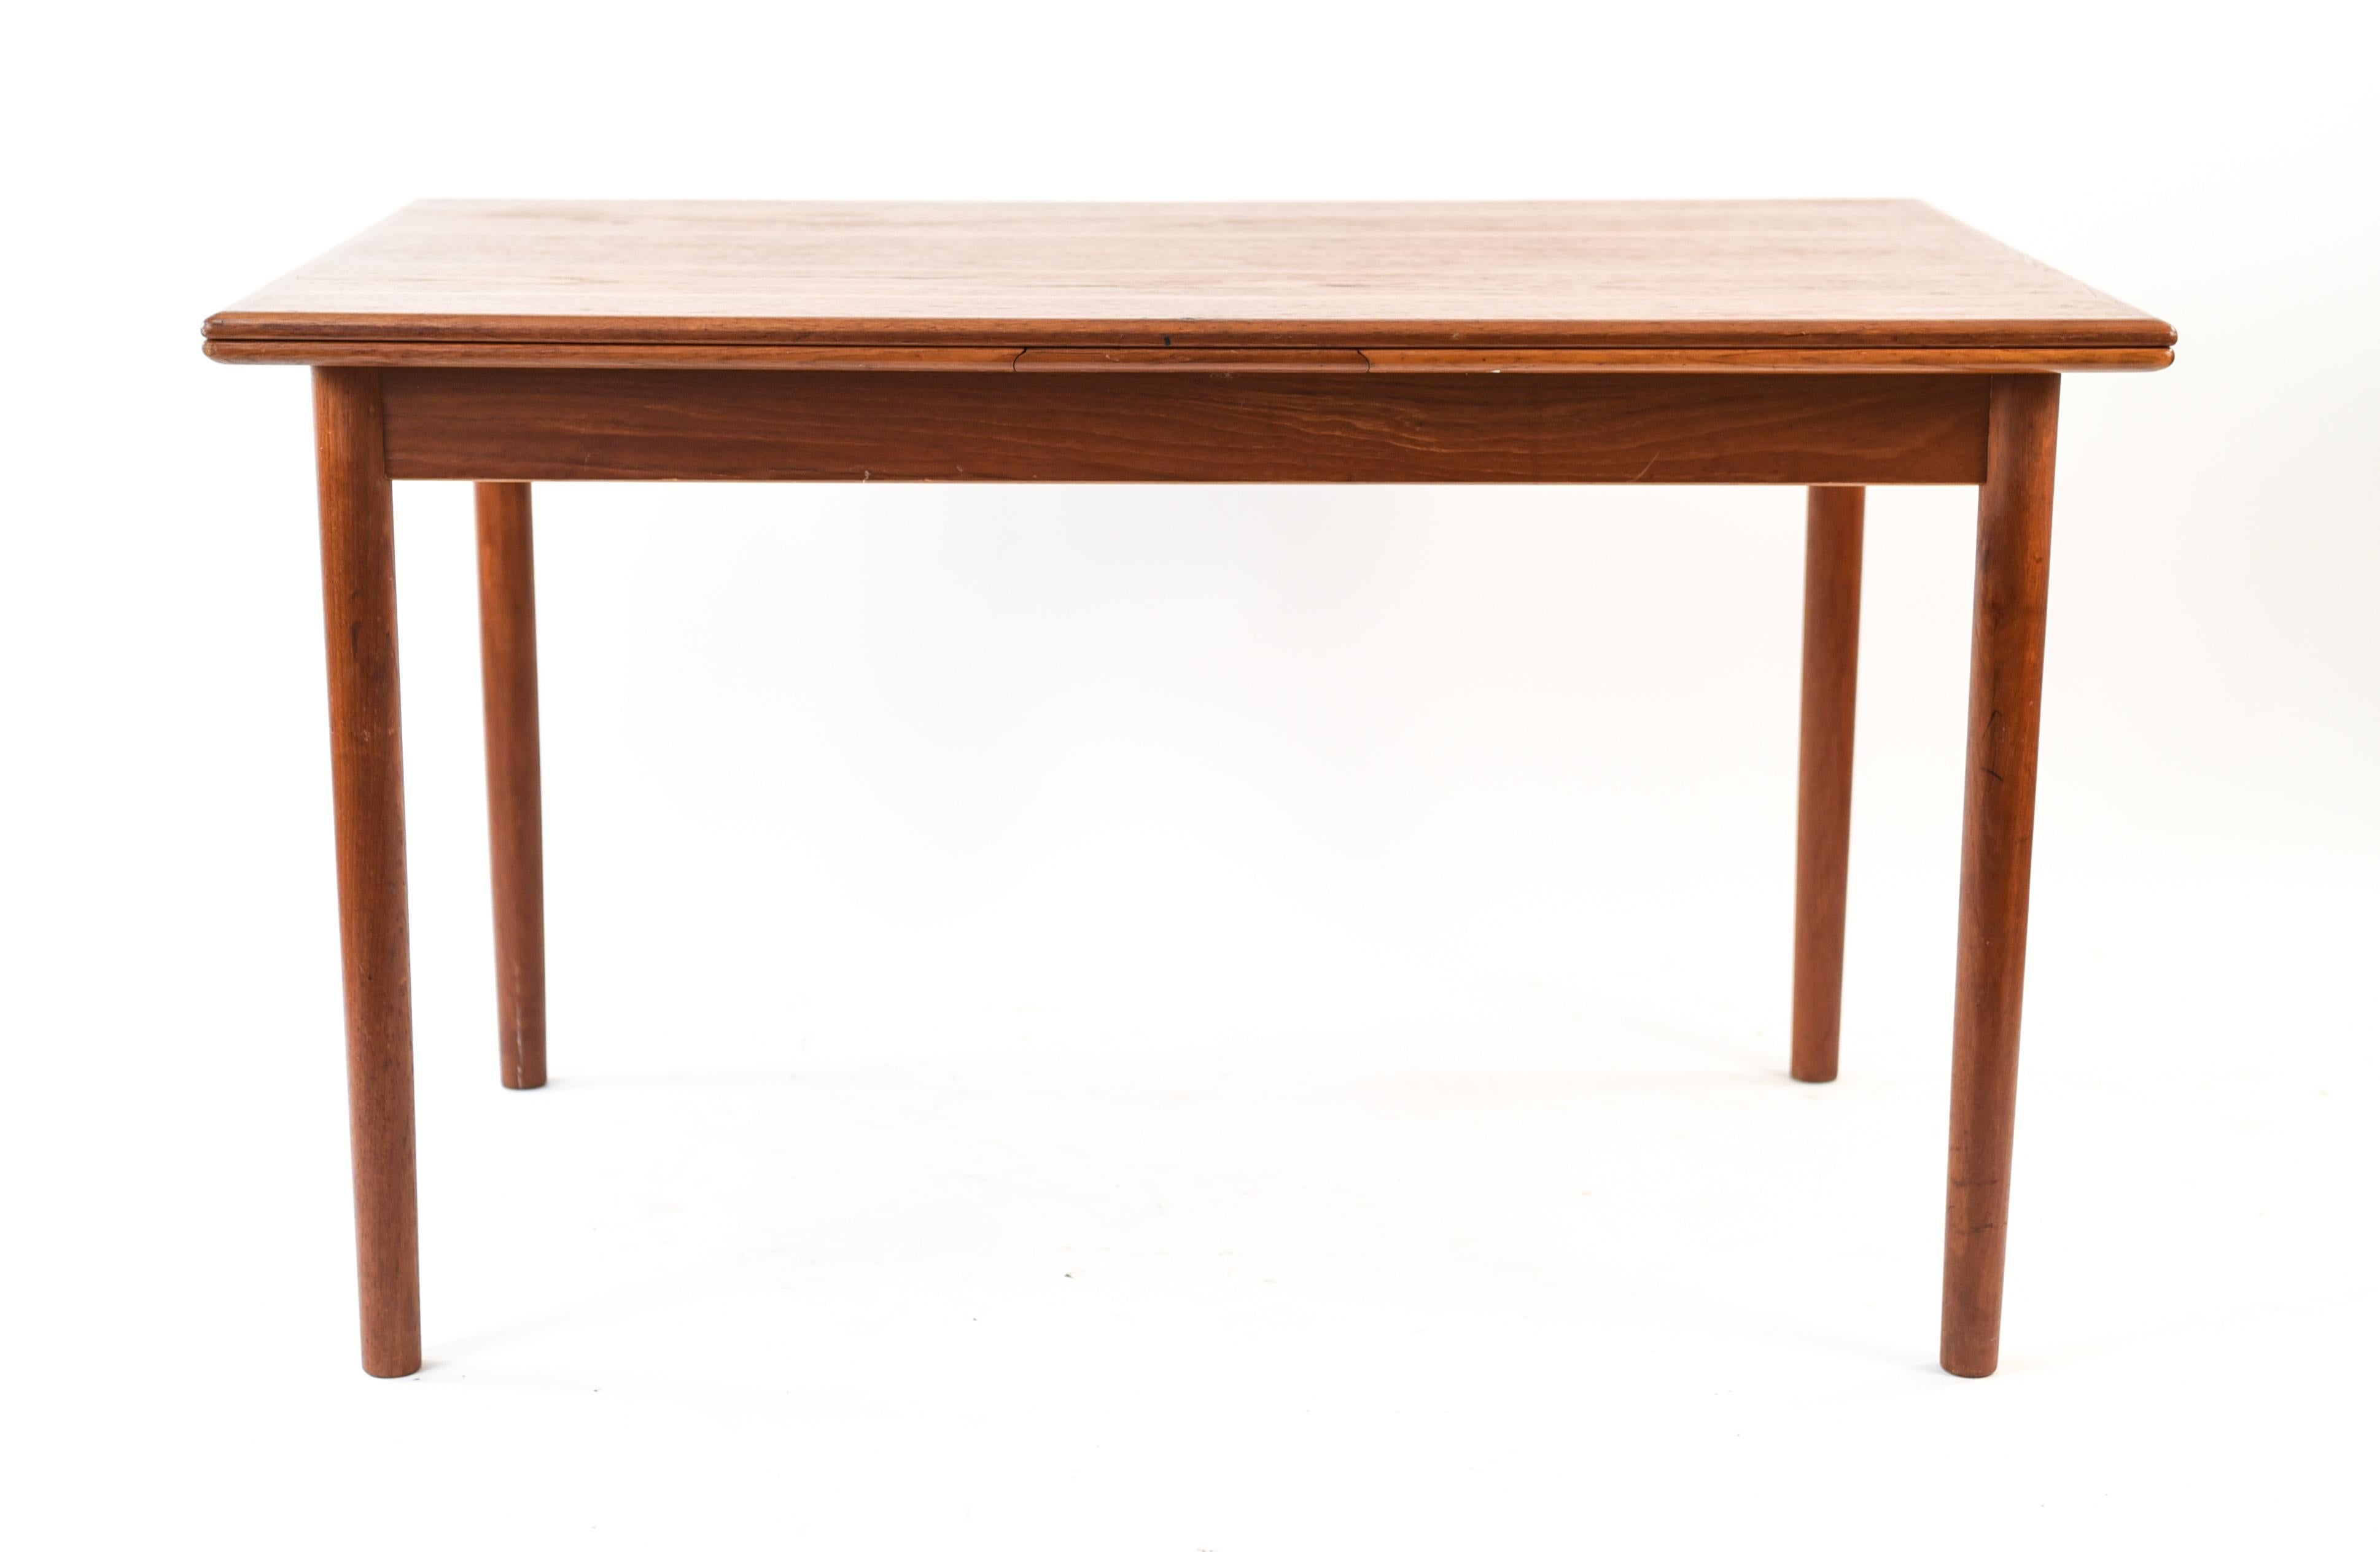 This Danish midcentury dining table is made of teak wood. A classic, Minimalist rectangular form that will complement any dining space. With two pull-out leaves.